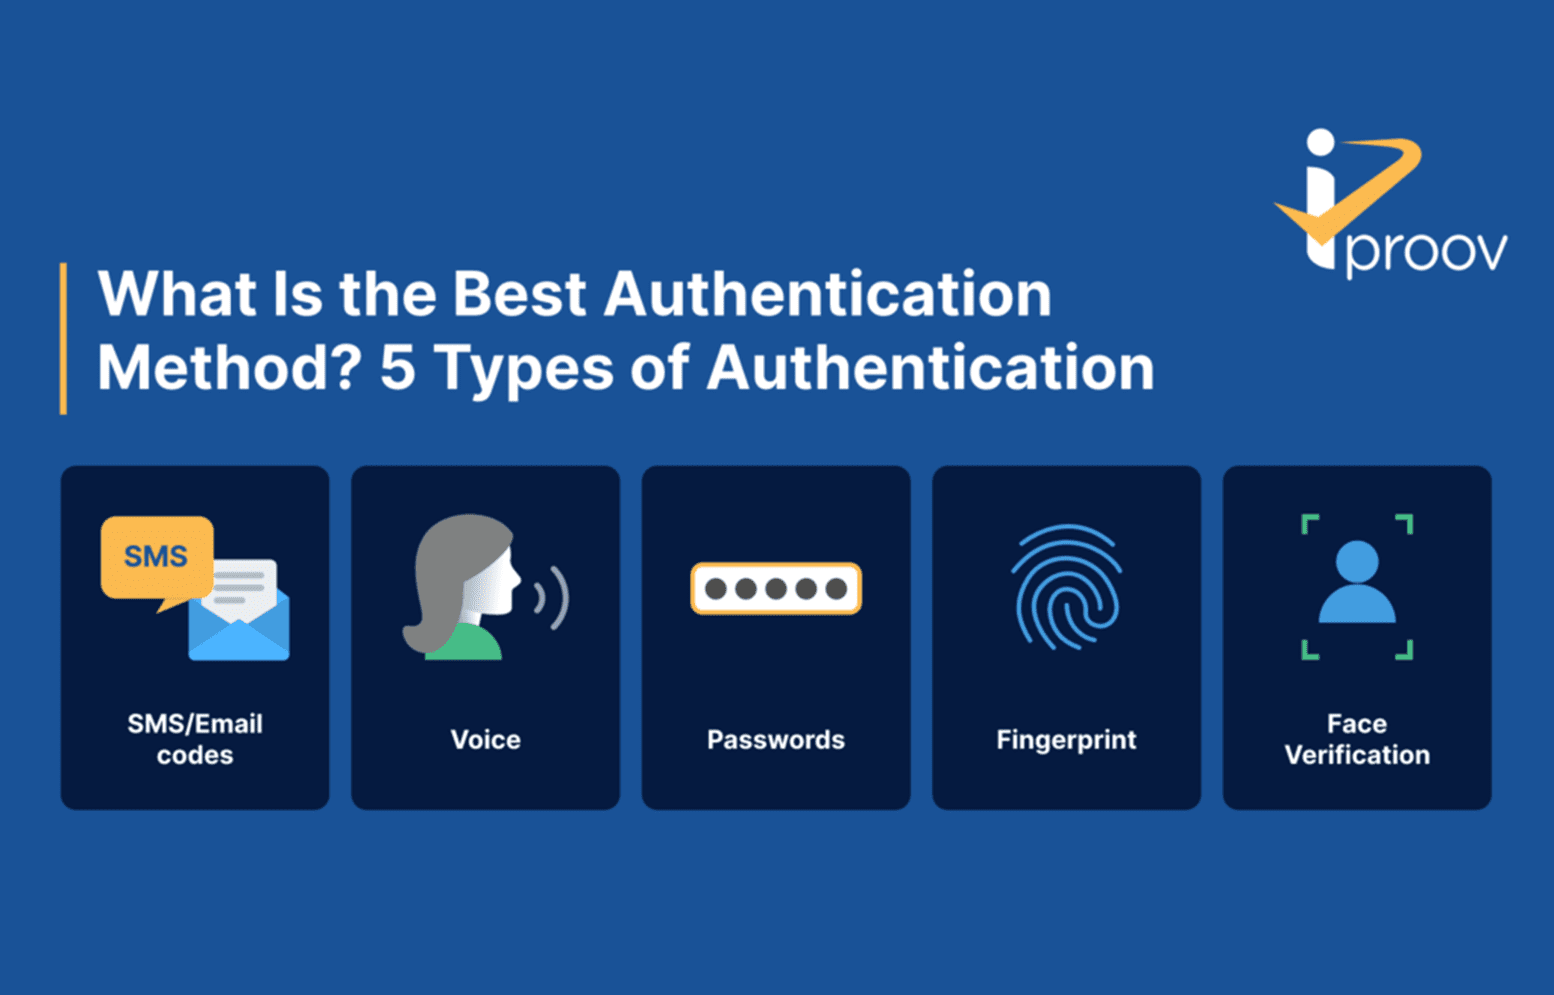 Image representing different authentication method types: SMS, voice, password, fingerprint, face biometrics - with icons for each in a row